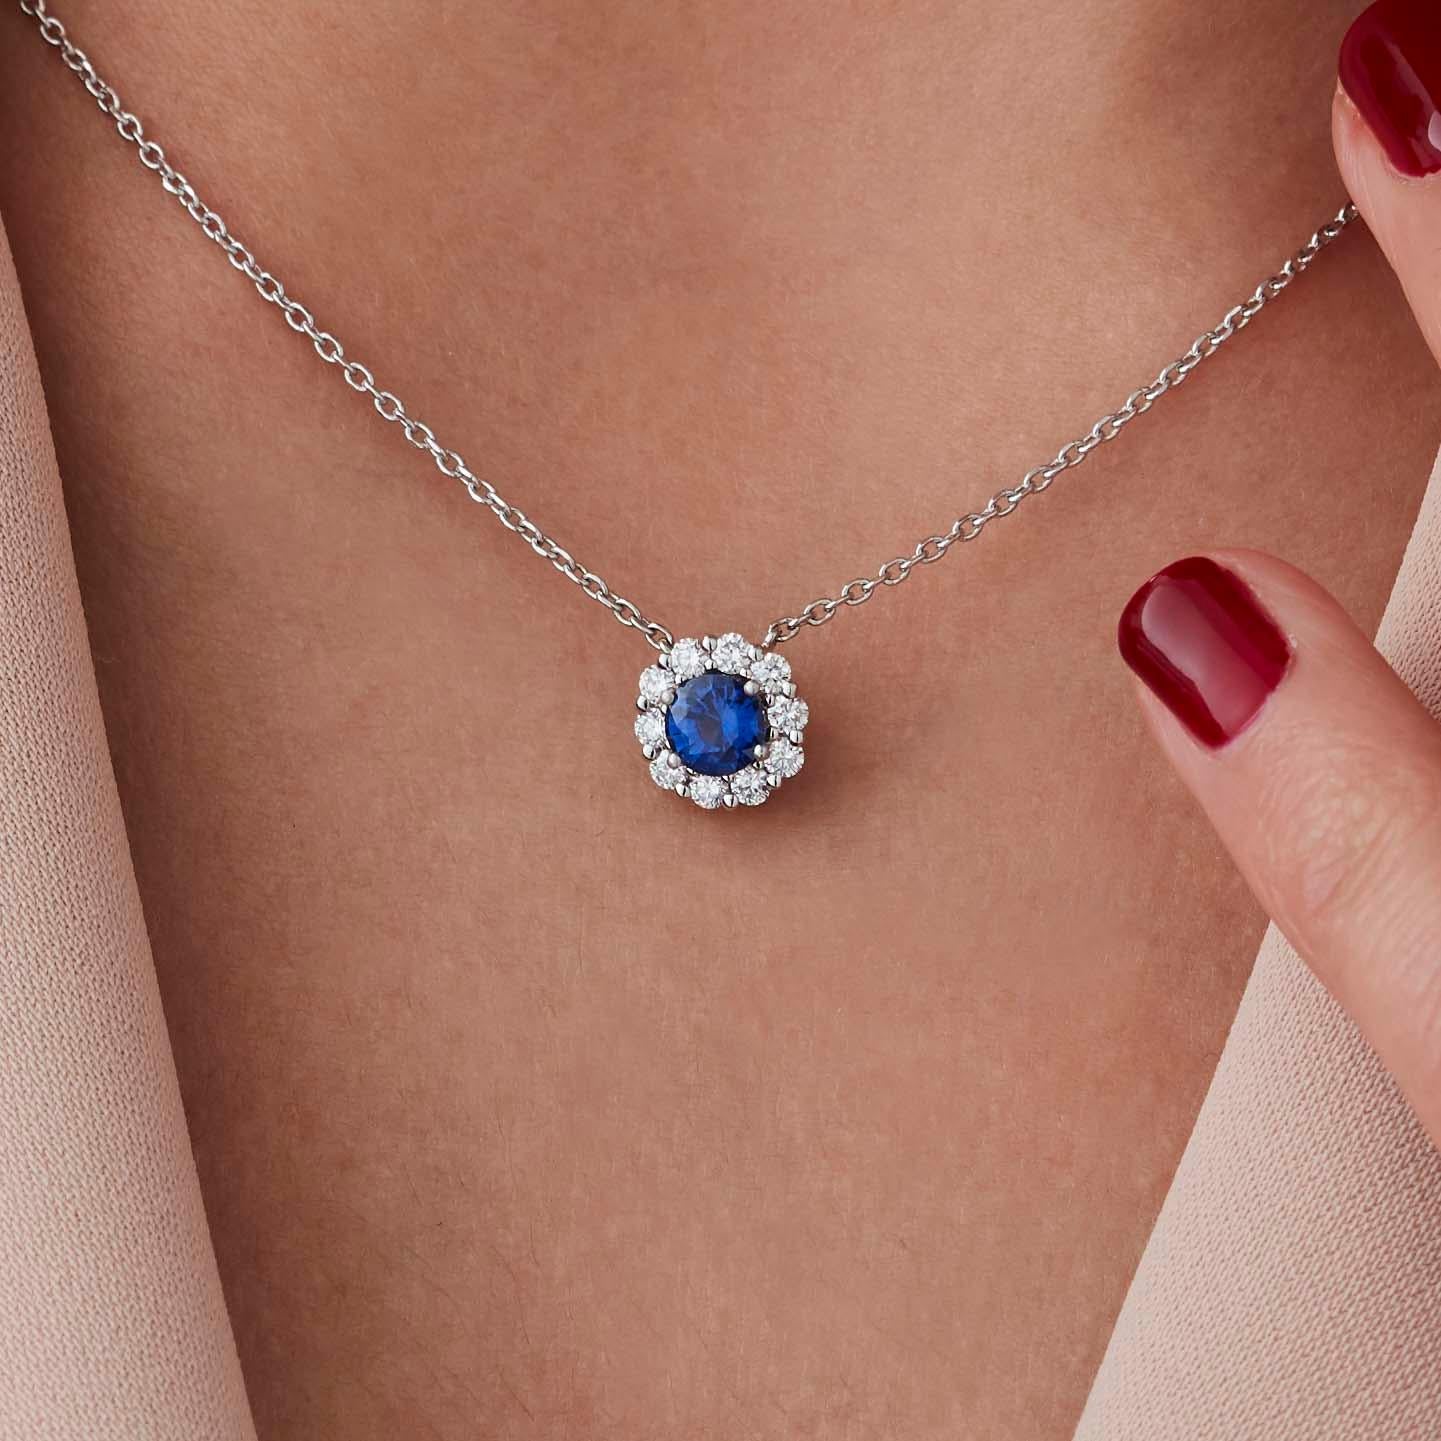 A House of Garrard platinum pendant from the Garrard 1735 collection set with a central round sapphire and round white diamonds.

1 round sapphire 
10 round white diamonds weighing 0.35cts
Total diamond weight: 0.35cts   

Additional Photos and